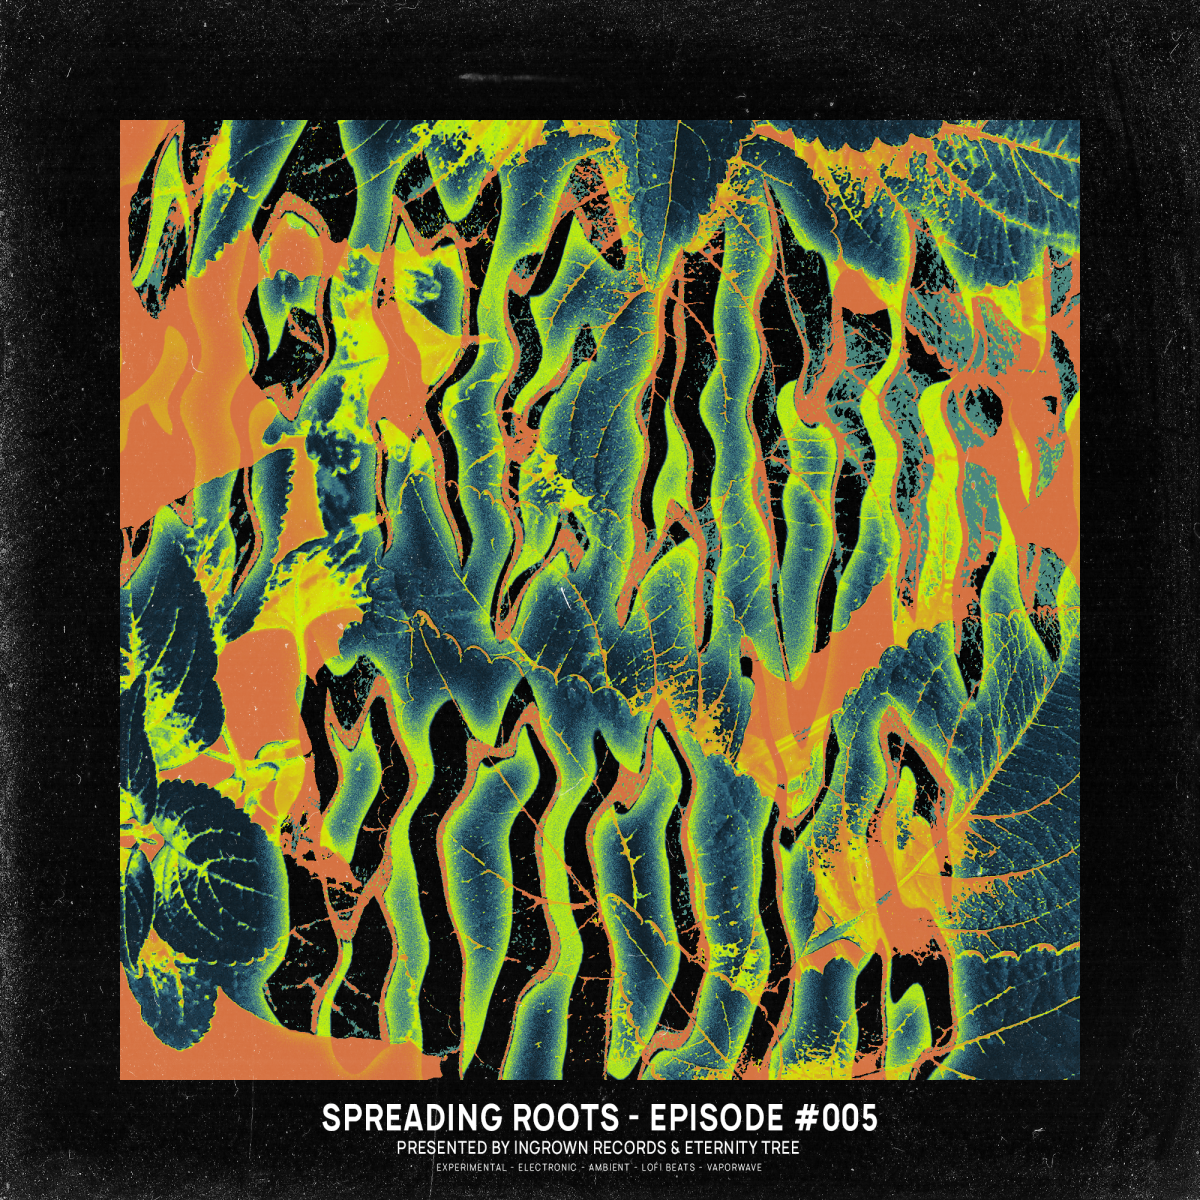 Spreading Roots Episode #5